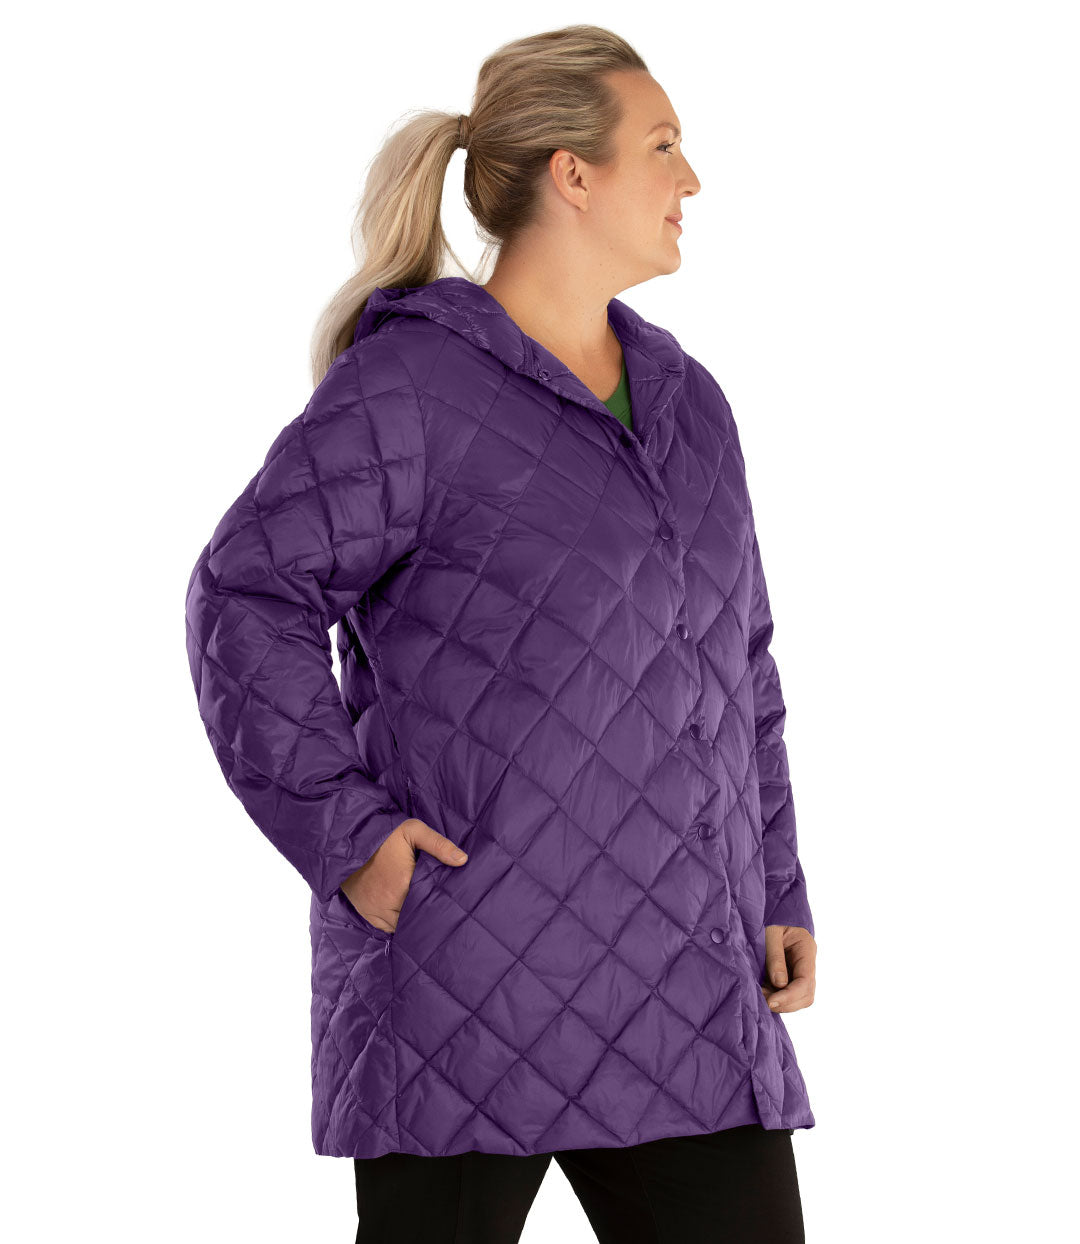 Plus size woman, front side view, facing right wearing a JunoActive plus size Quilted Light Weight Parka in Amethyst Purple. The jacket has a hood, snap front closure and side zip pockets. Jacket quilting is a diamond pattern. The length of the plus size jacket hits below the hips.